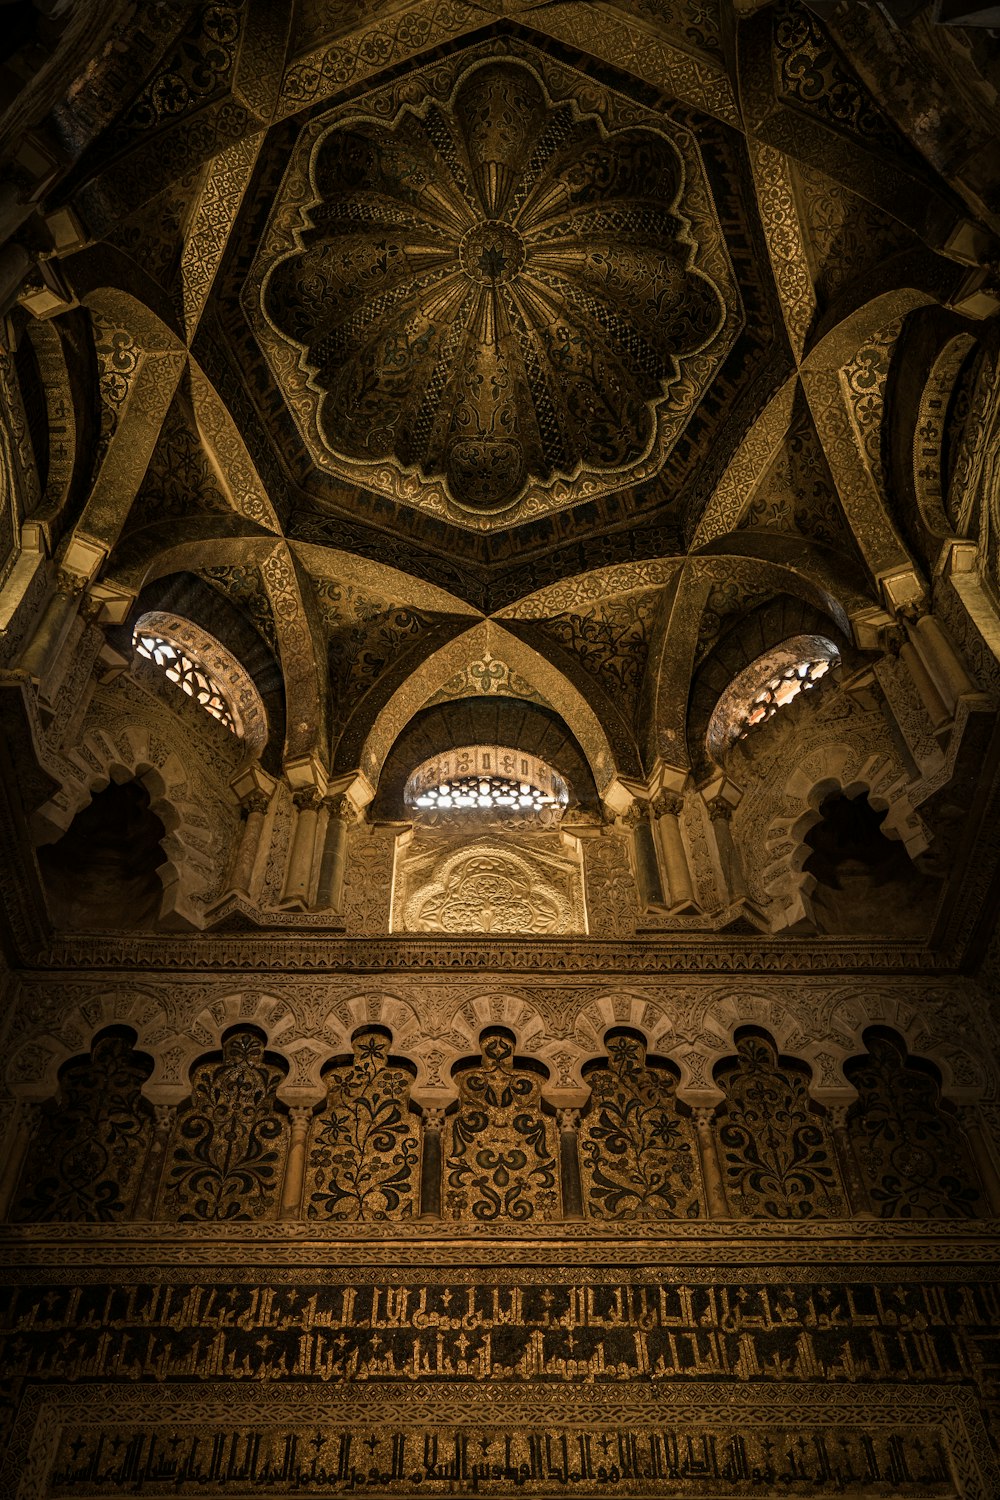 the ceiling of a building with intricate carvings